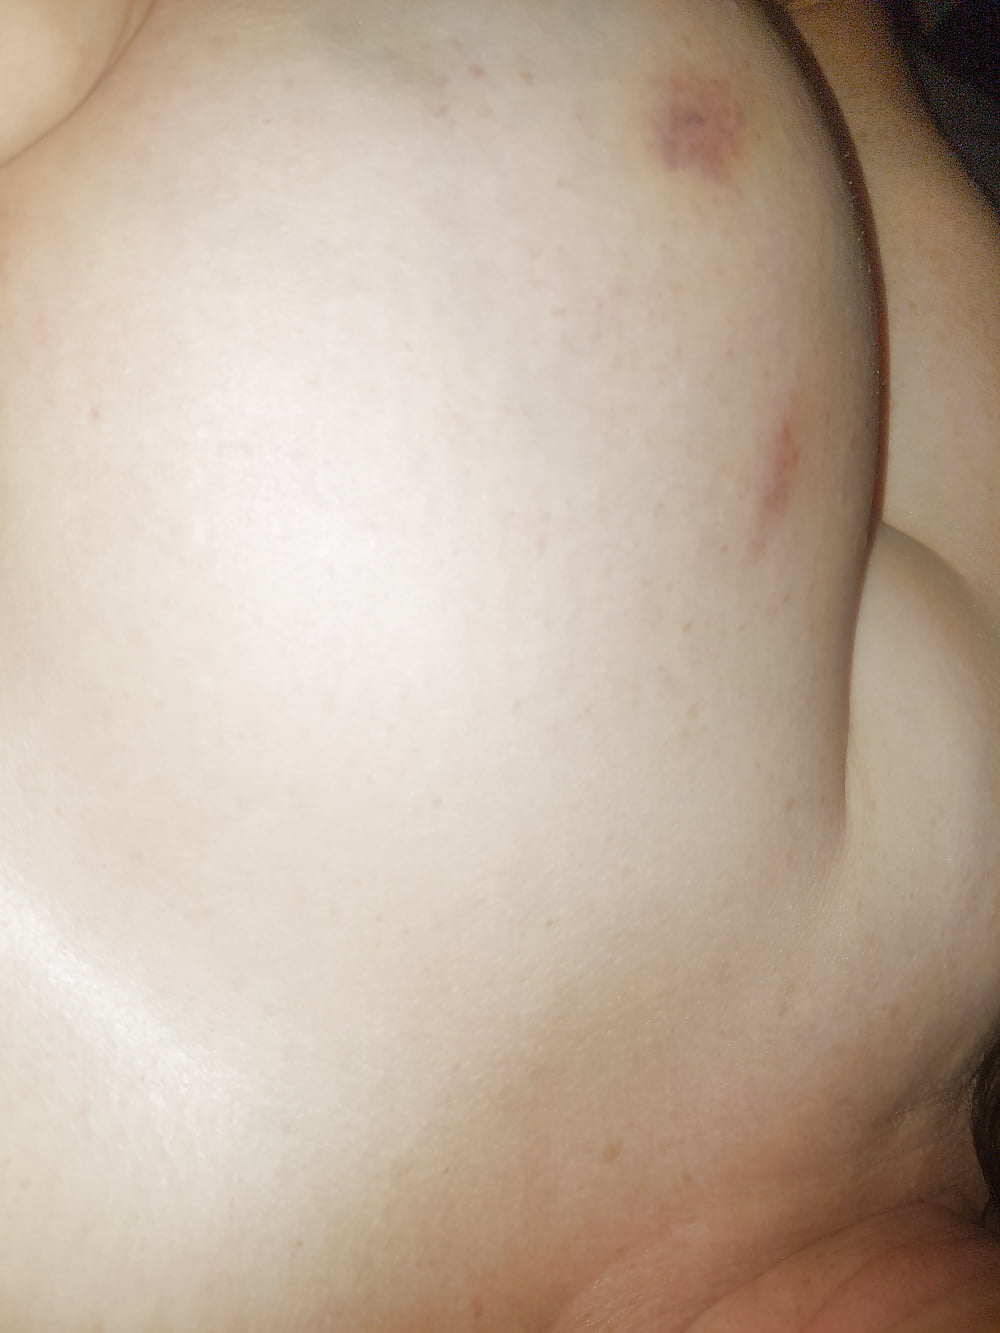 Wifes_big_tits_with_lovebites_from_young_guy (2/2)